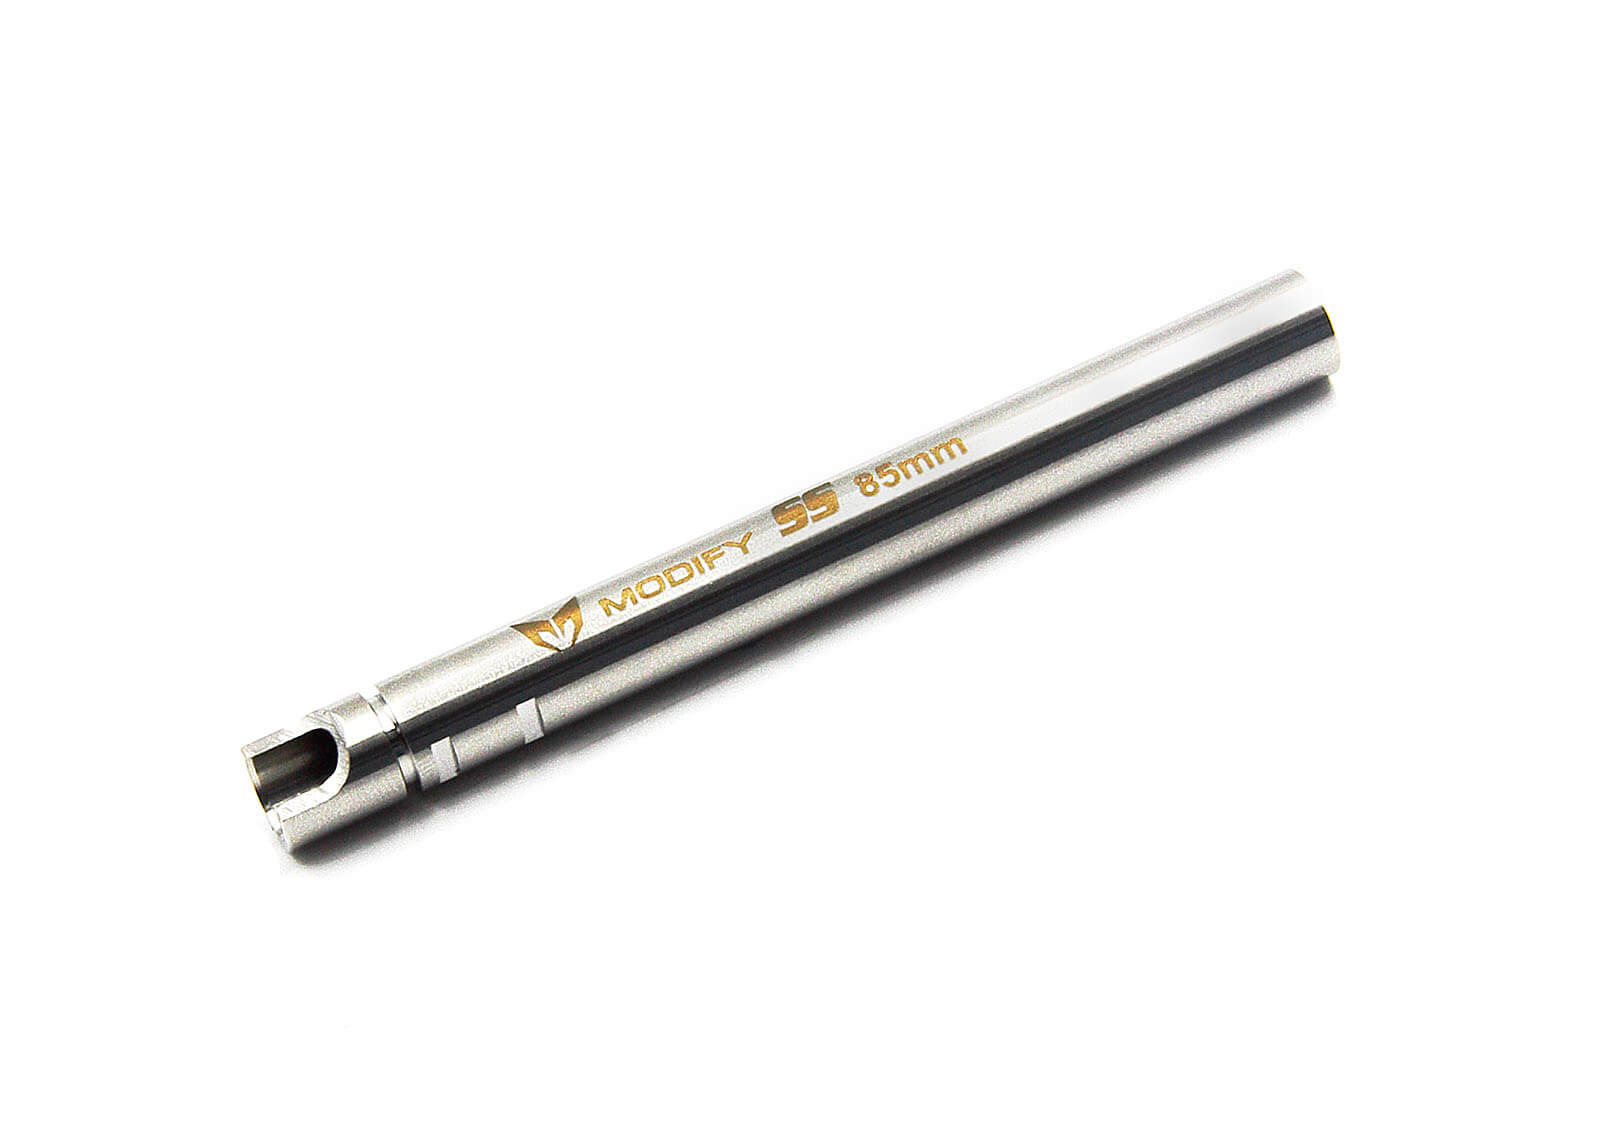 Stainless Steel 6.03mm Precision GBB Inner Barrel 85mm - Modify Airsoft parts